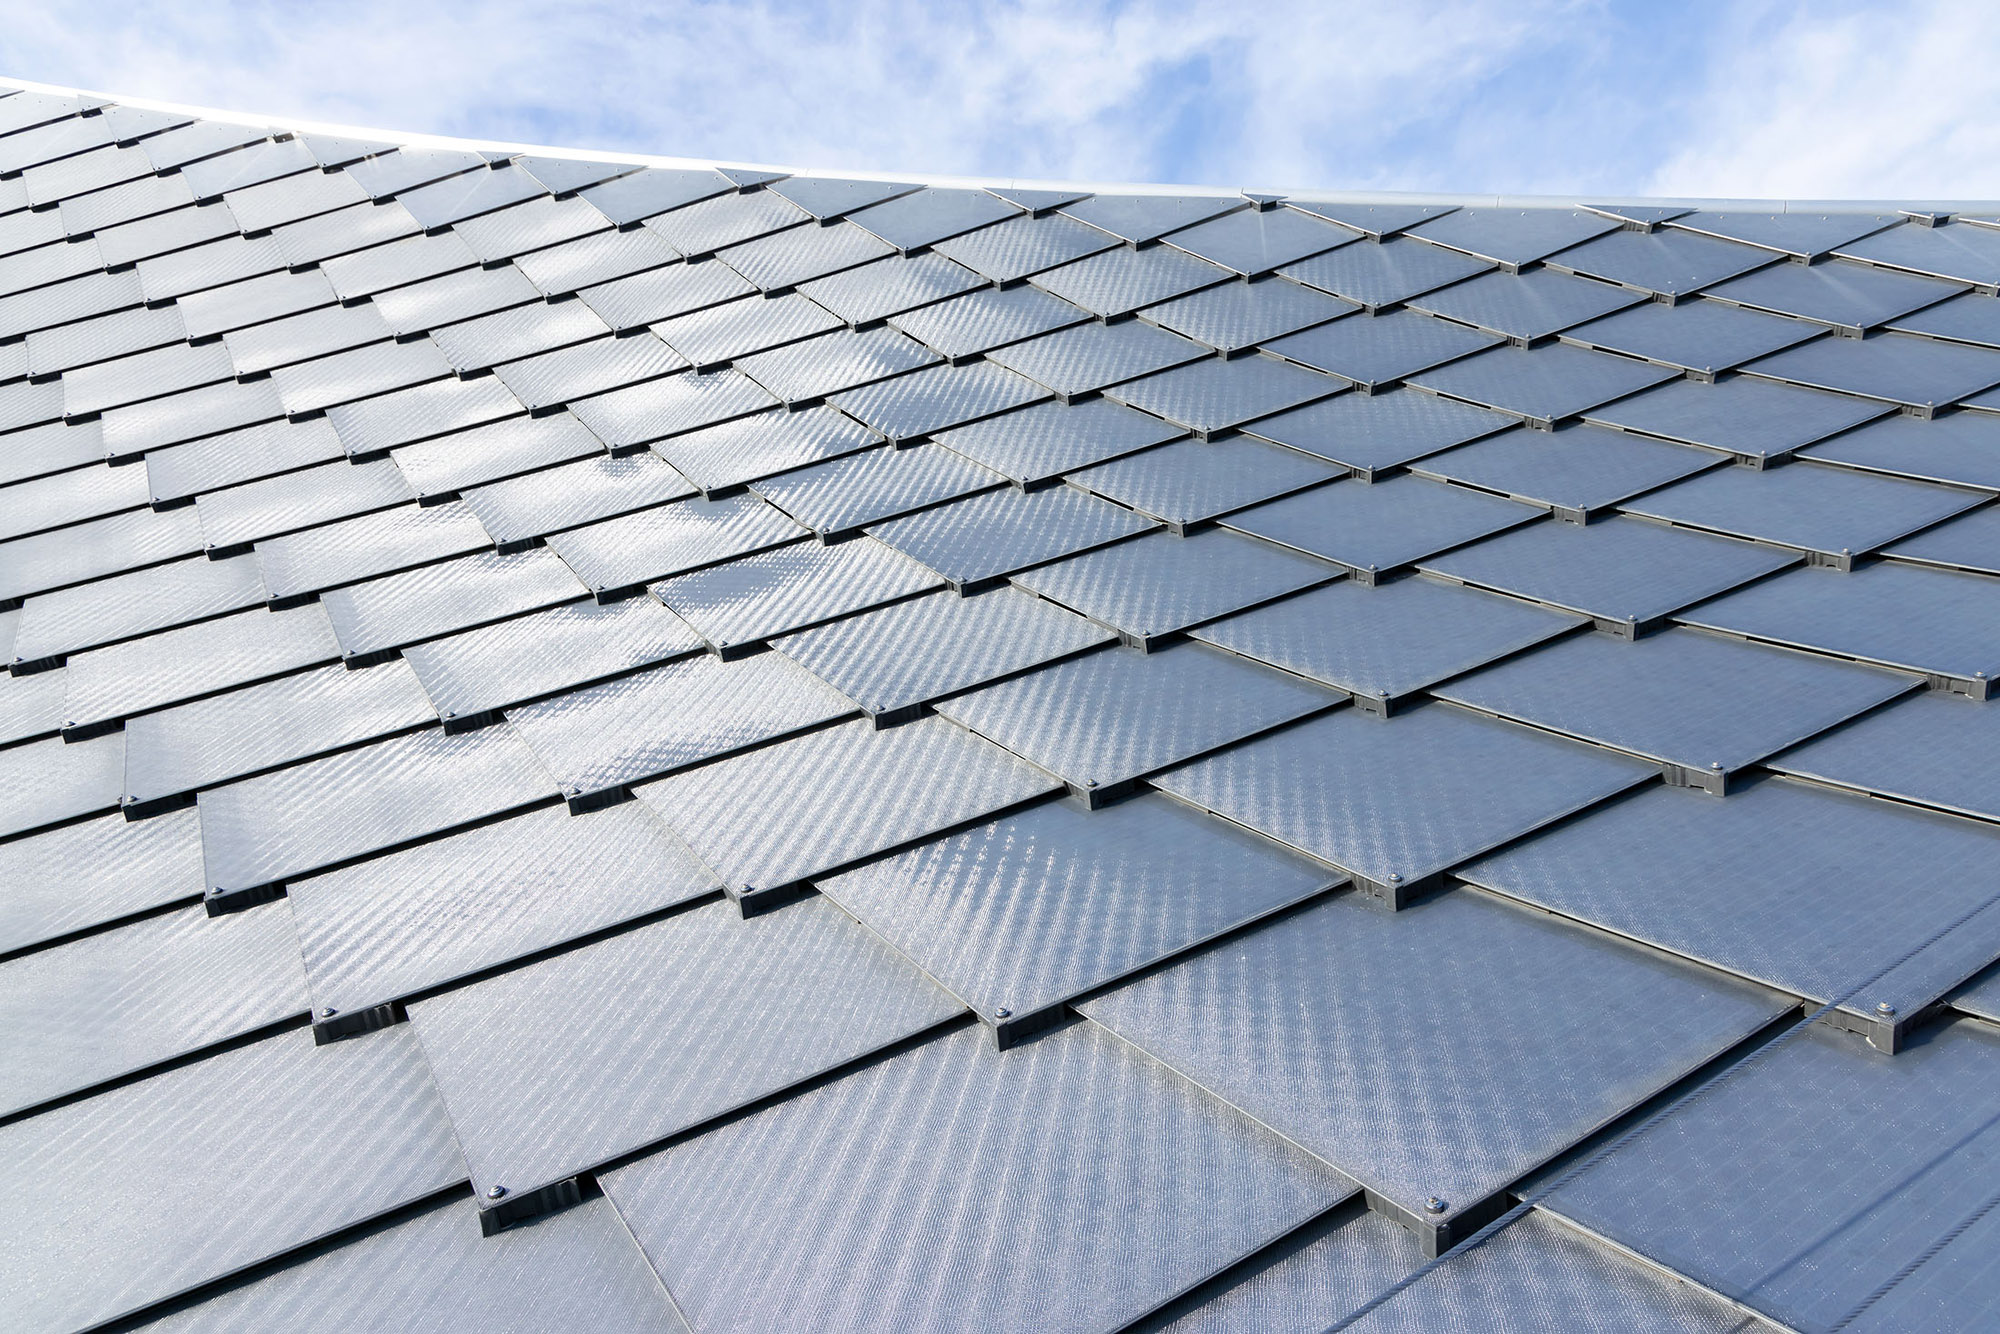 The first "dragon-scale" solar skin roof